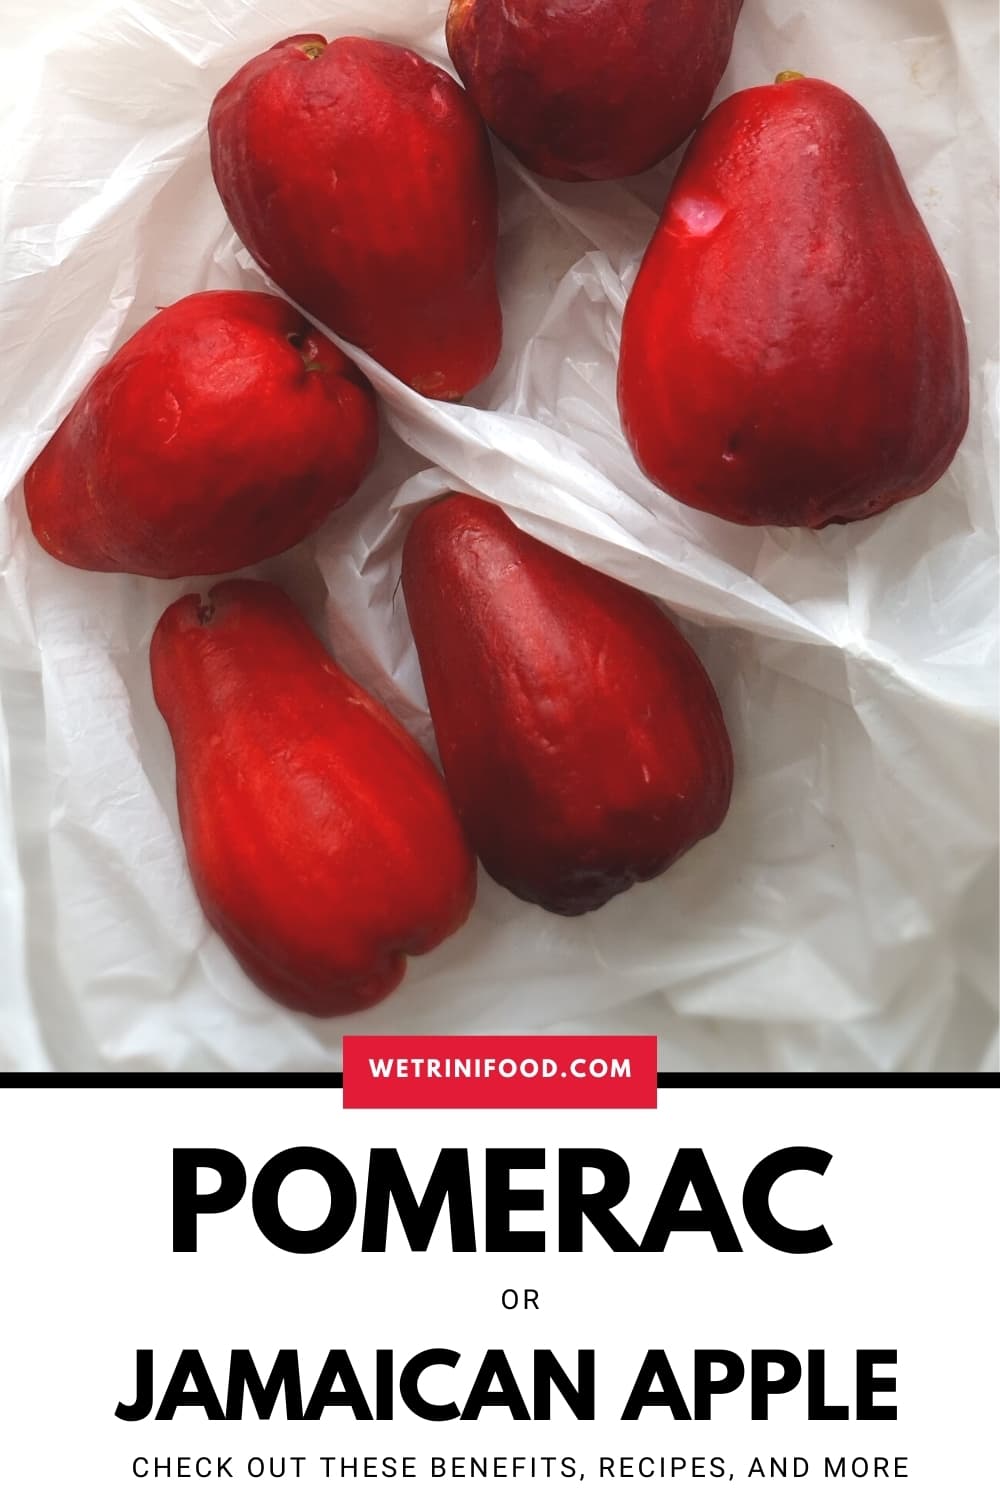 pomerac or jamaican apples: benefits, recipes, and more